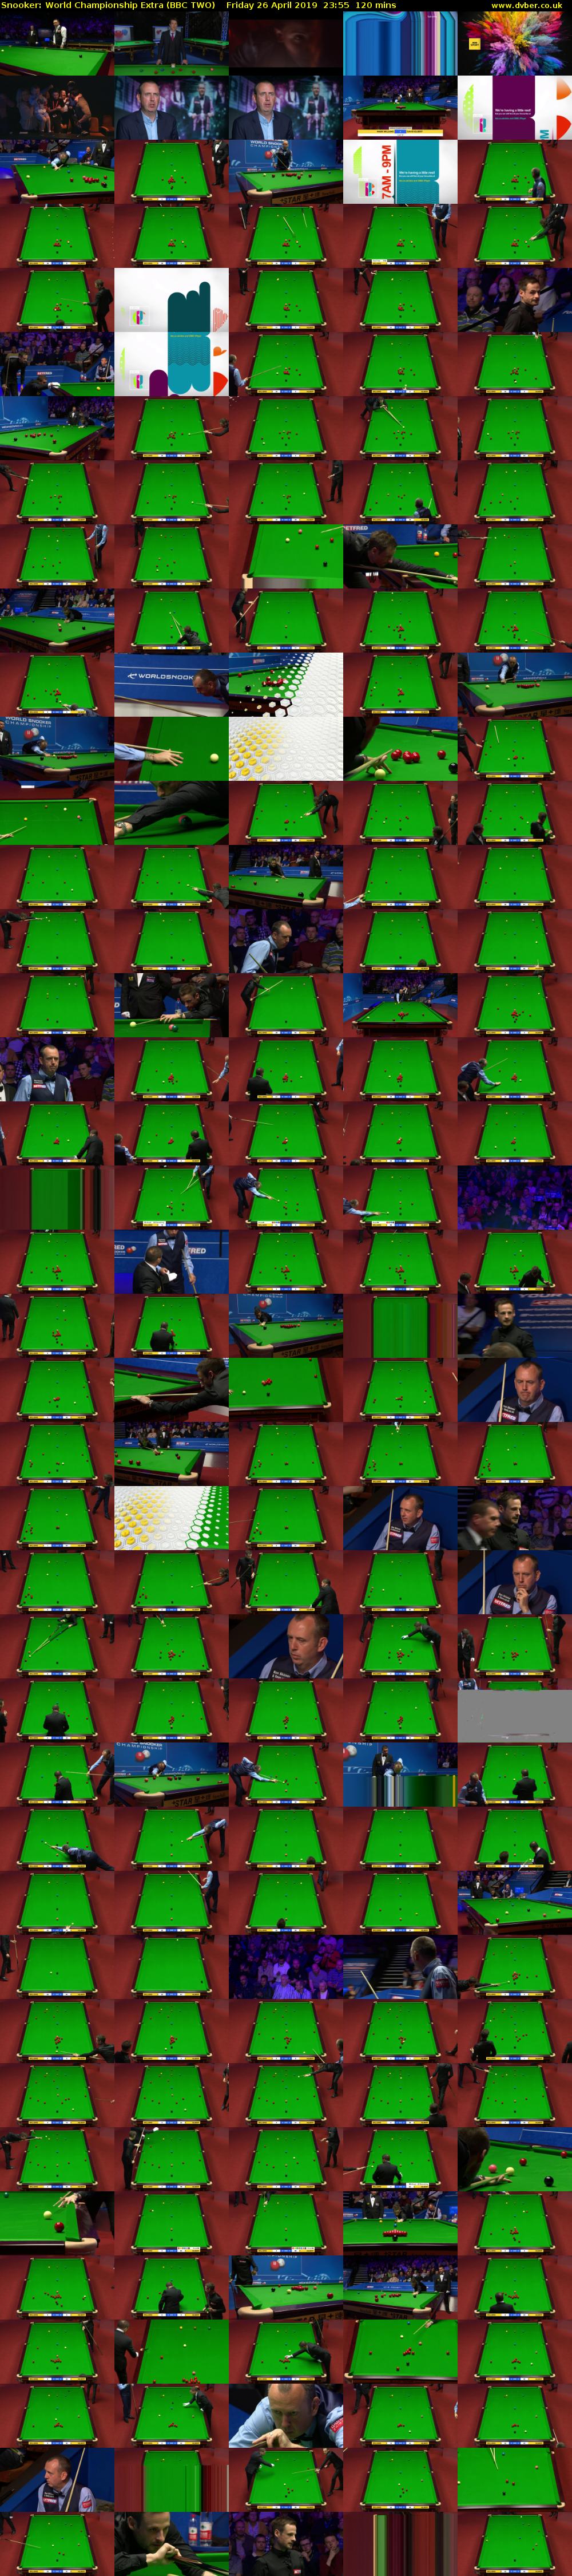 Snooker: World Championship Extra (BBC TWO) Friday 26 April 2019 23:55 - 01:55